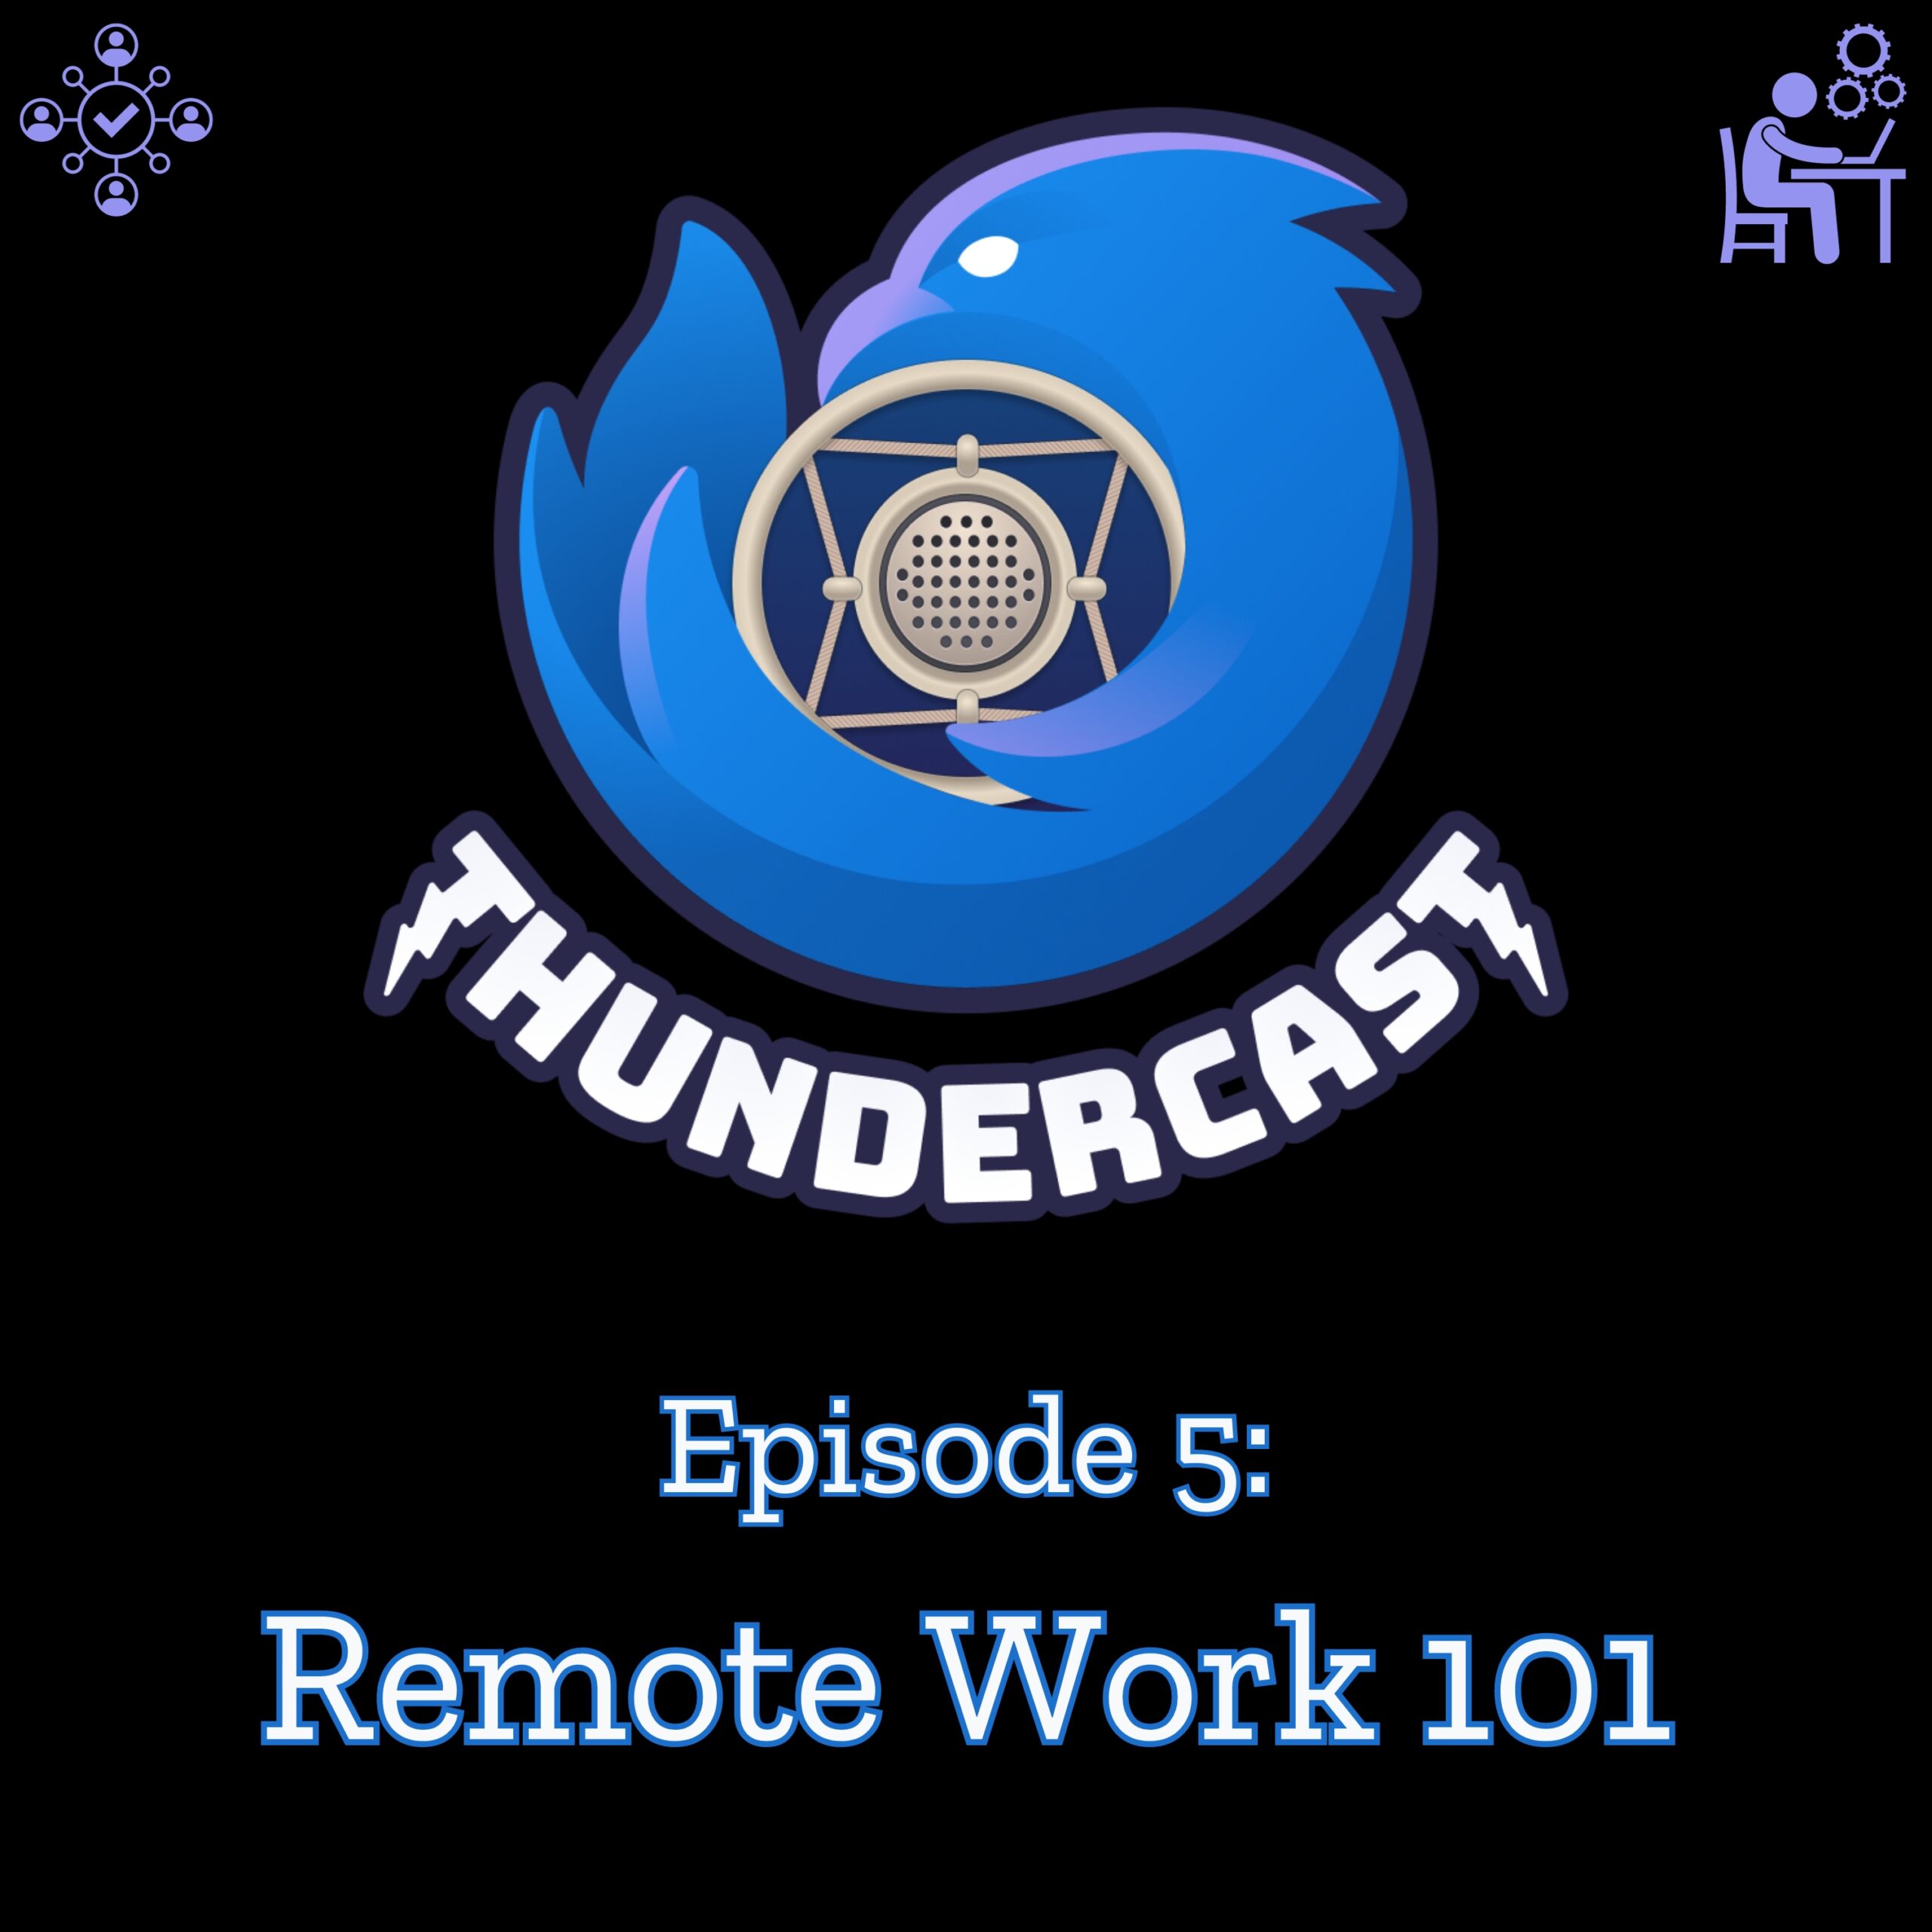 The Thunderbird logo is shown embracing a microphone. Underneath is the text "Episode 5: Remote Work 101"